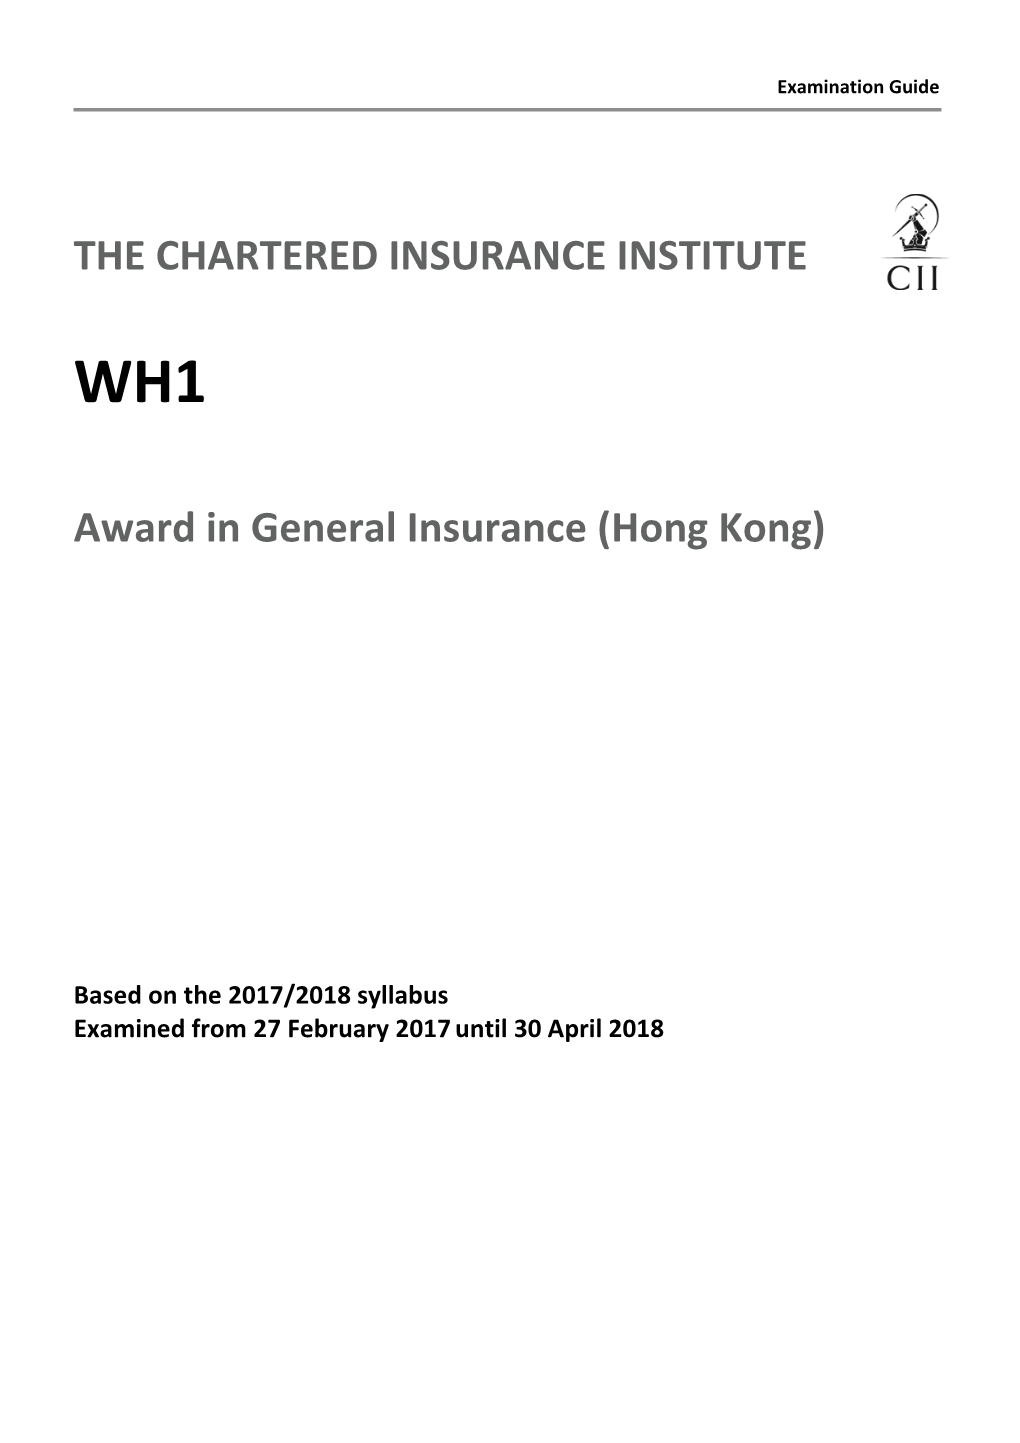 THE CHARTERED INSURANCE INSTITUTE Award in General